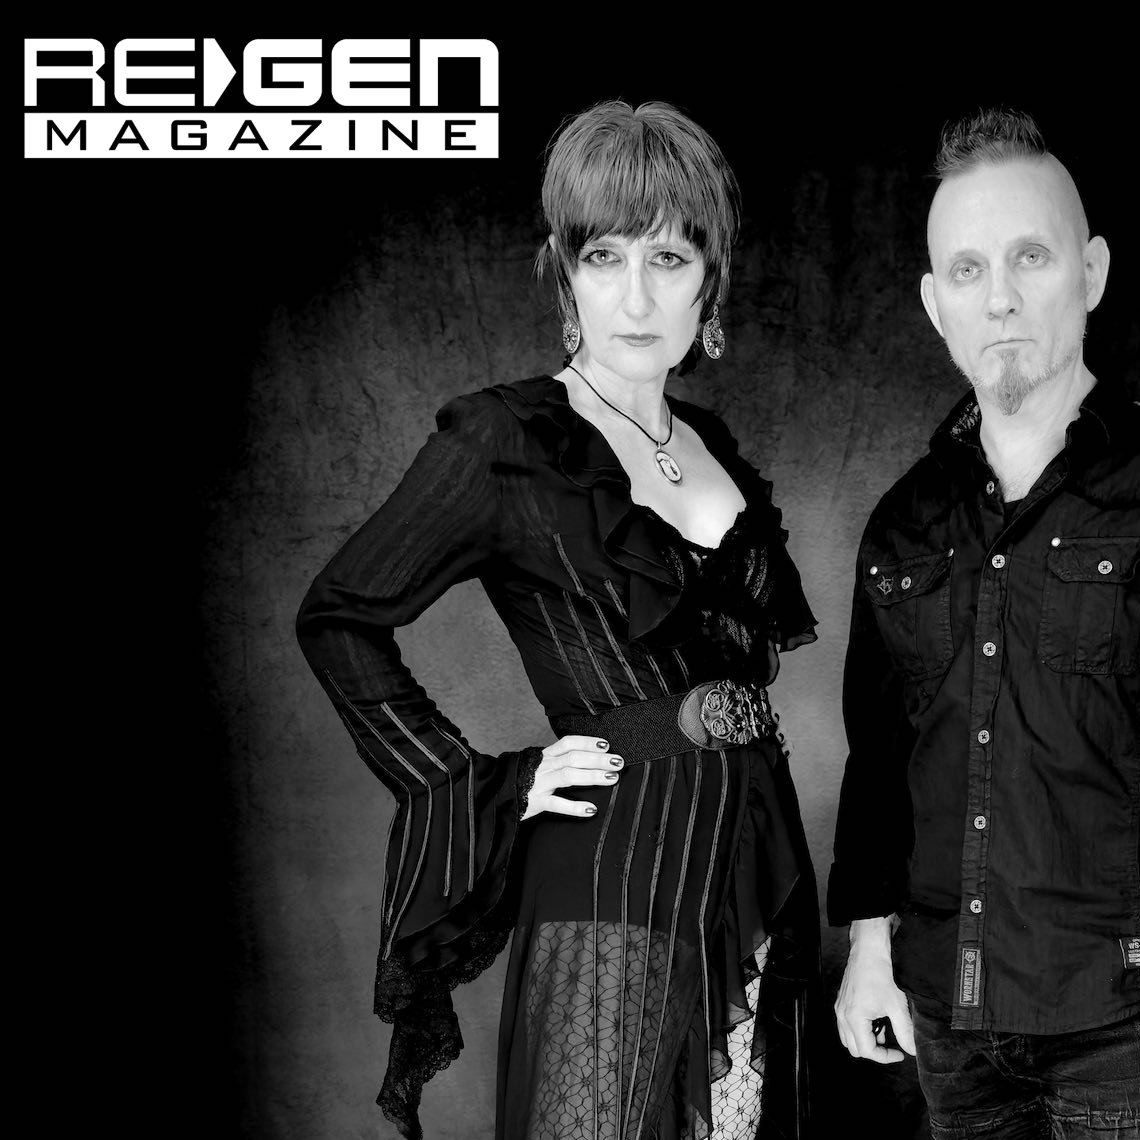 NYC-based #postpunk #cabaret duo @frenchyNthepunk will release new album 'Midnight Garden' June 28. Previewed by taster 'Hypnotized', #ReGenMagazine has the scoop ~ tinyurl.com/frenchy-regen See them on forthcoming US/UK tour dates ~ songkick.com/artists/412972…